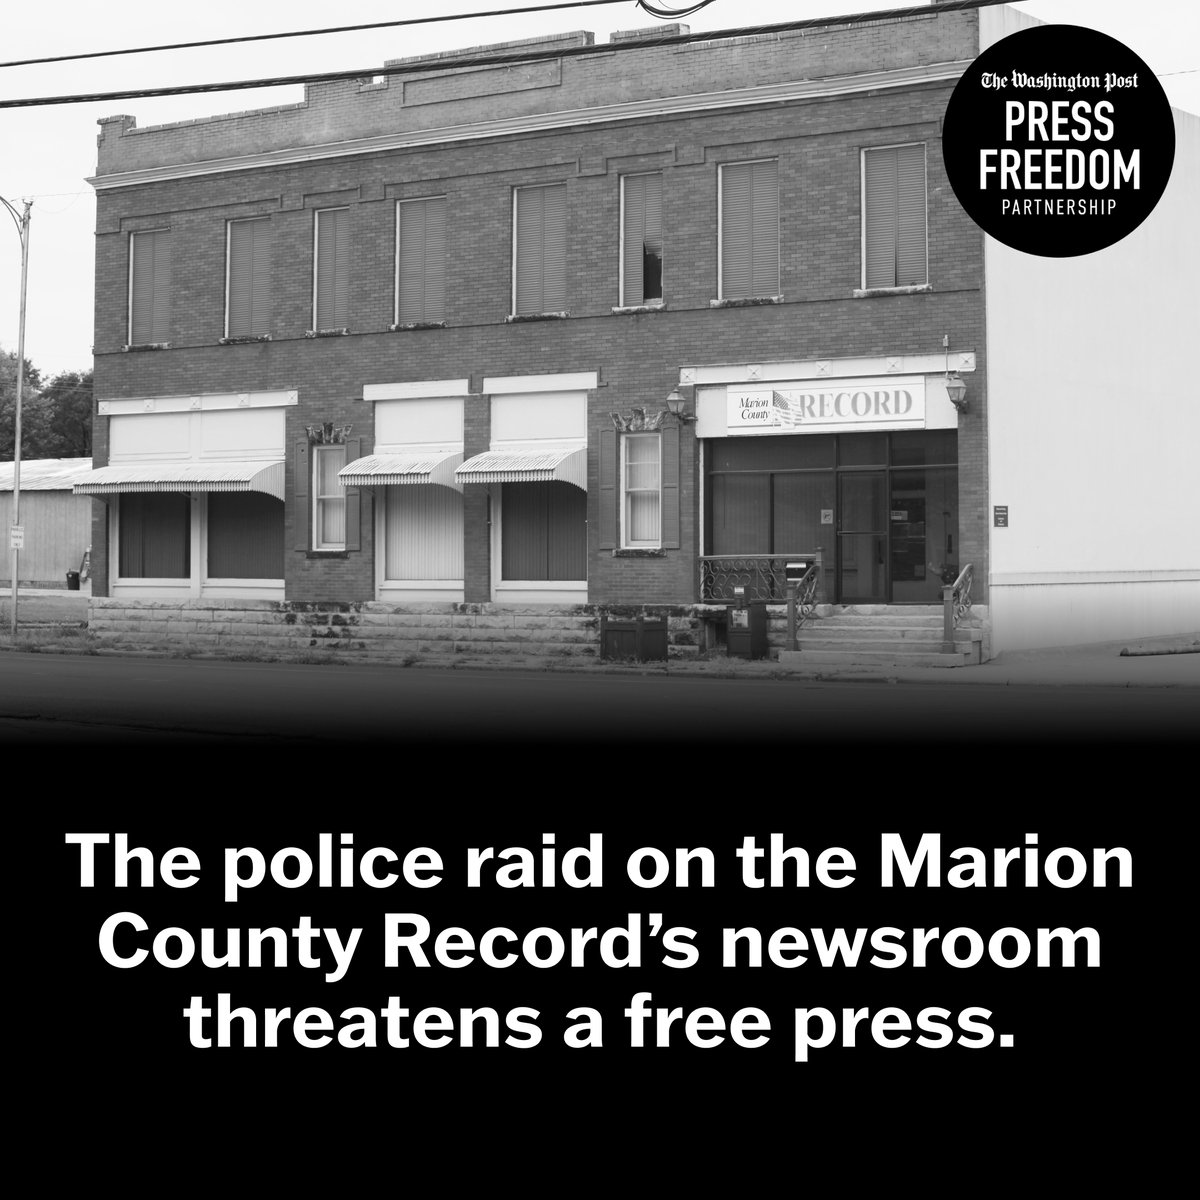 On August 11, police in Marion, Kansas, executed a search warrant at the Marion County Record’s newsroom. The county attorney later acknowledged there was insufficient evidence to support the warrant and police raid. A search of a newspaper office is an attack on democracy.